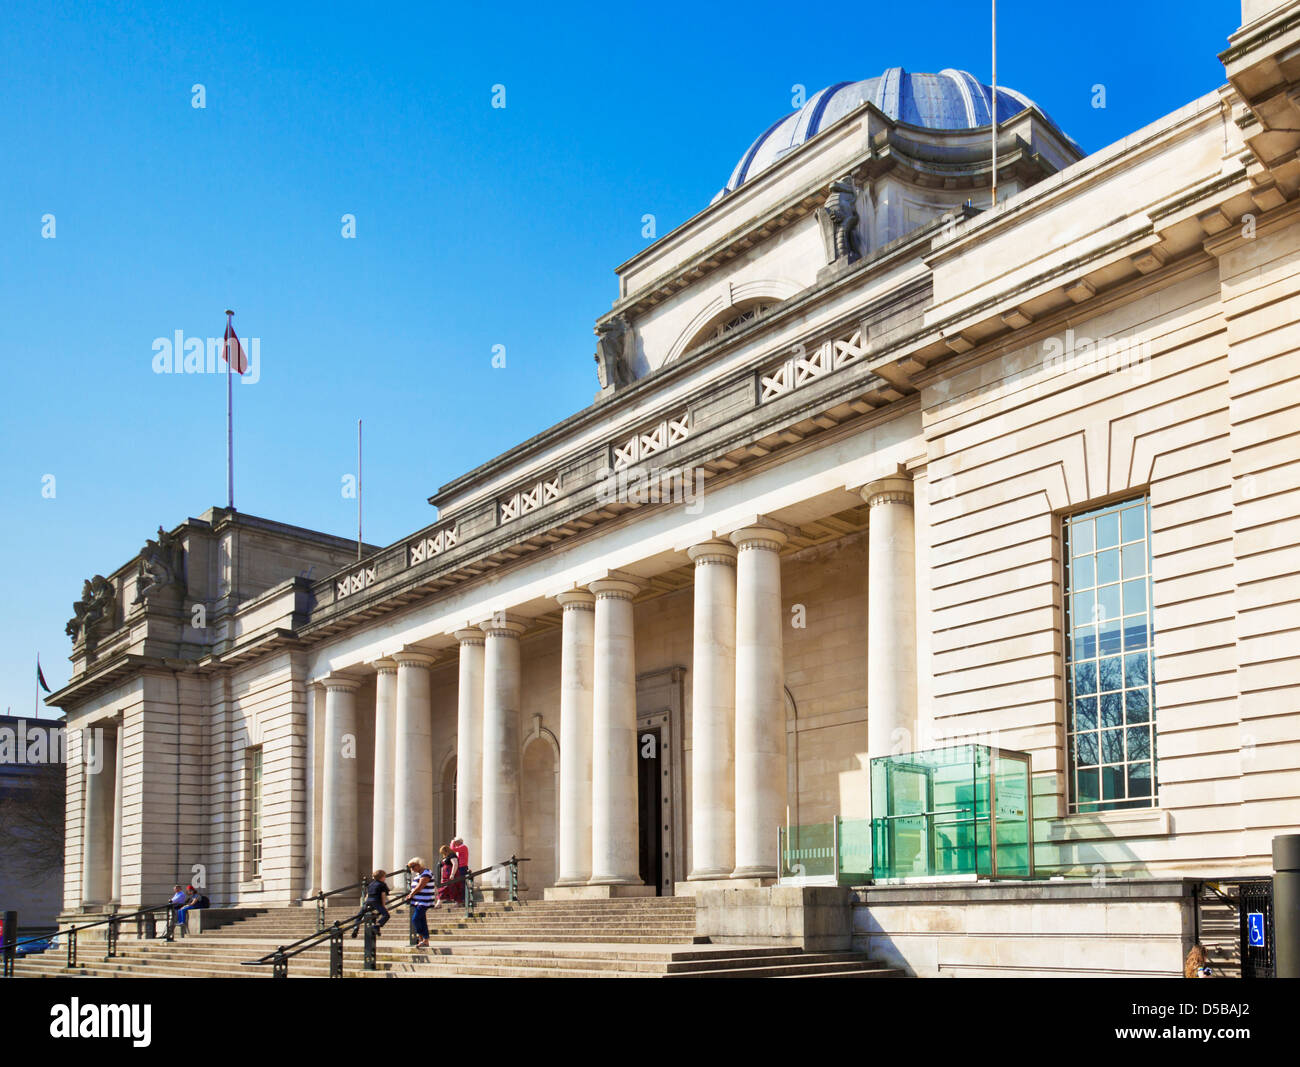 National Museum of Wales, Cardiff, Cathays park Cardiff South Glamorgan South Wales GB UK EU Europa Stockfoto